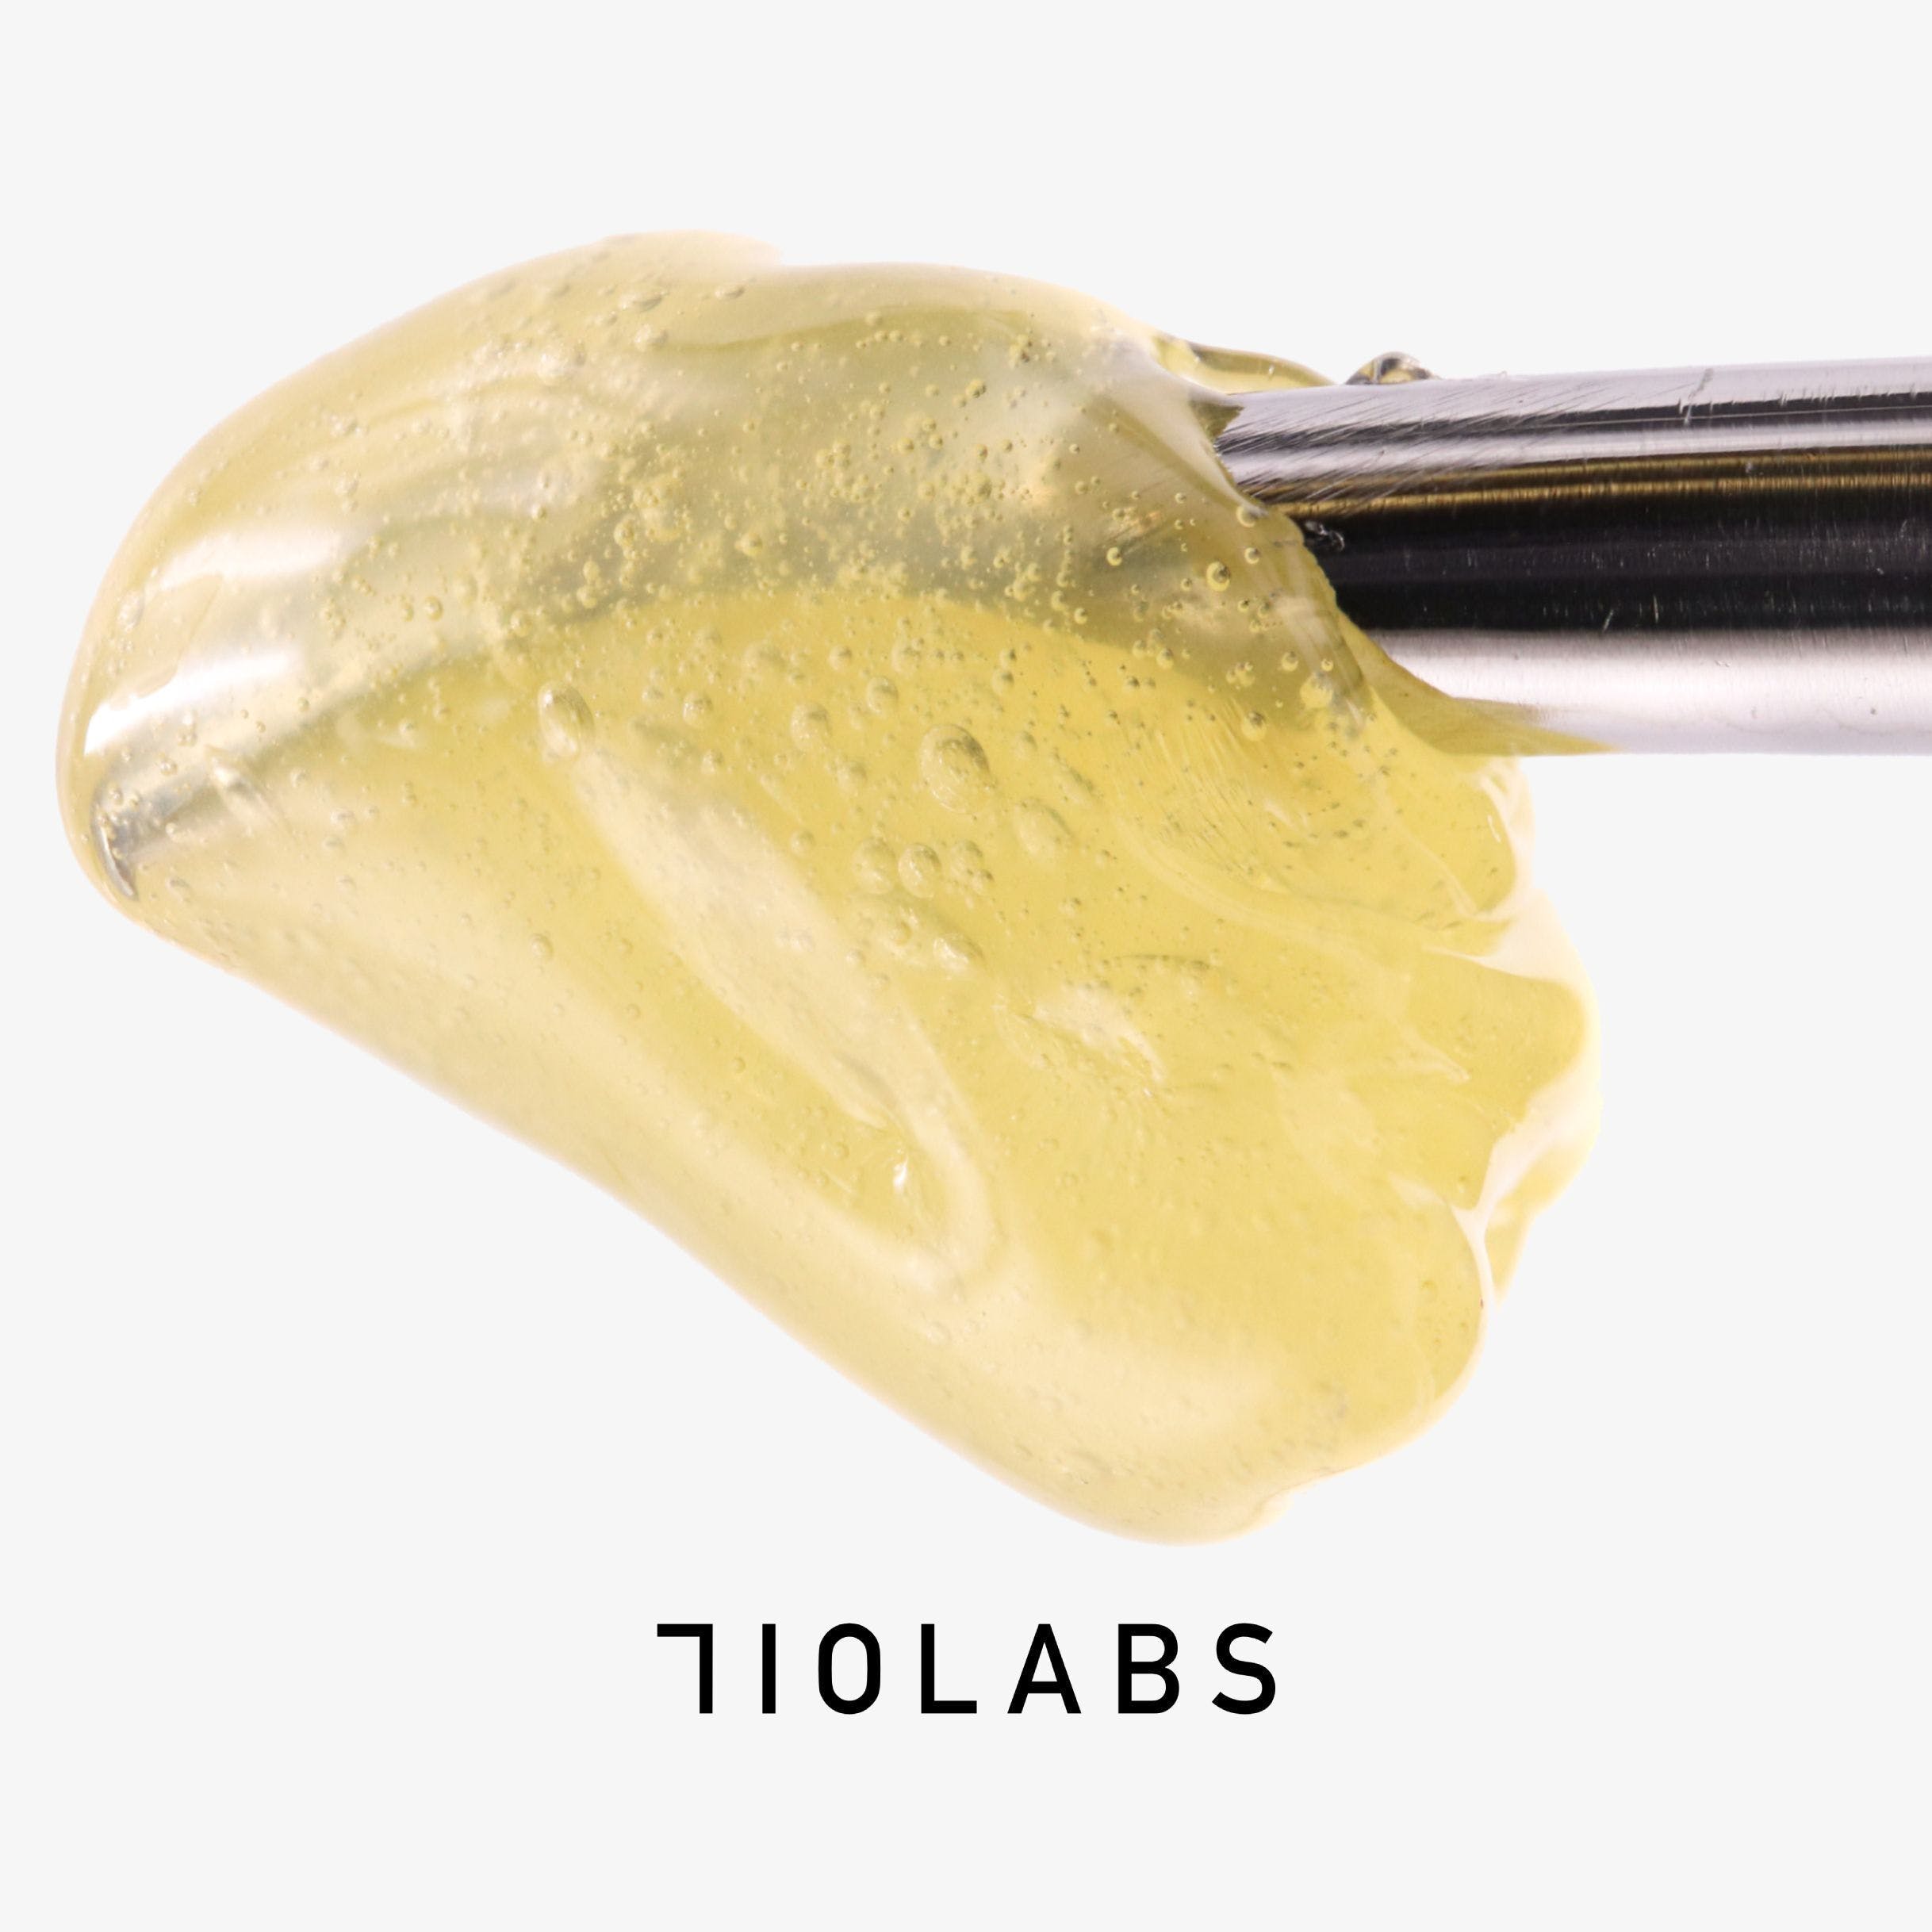 Buy 710 Chem + Bootylicious #1 Persy Live Rosin